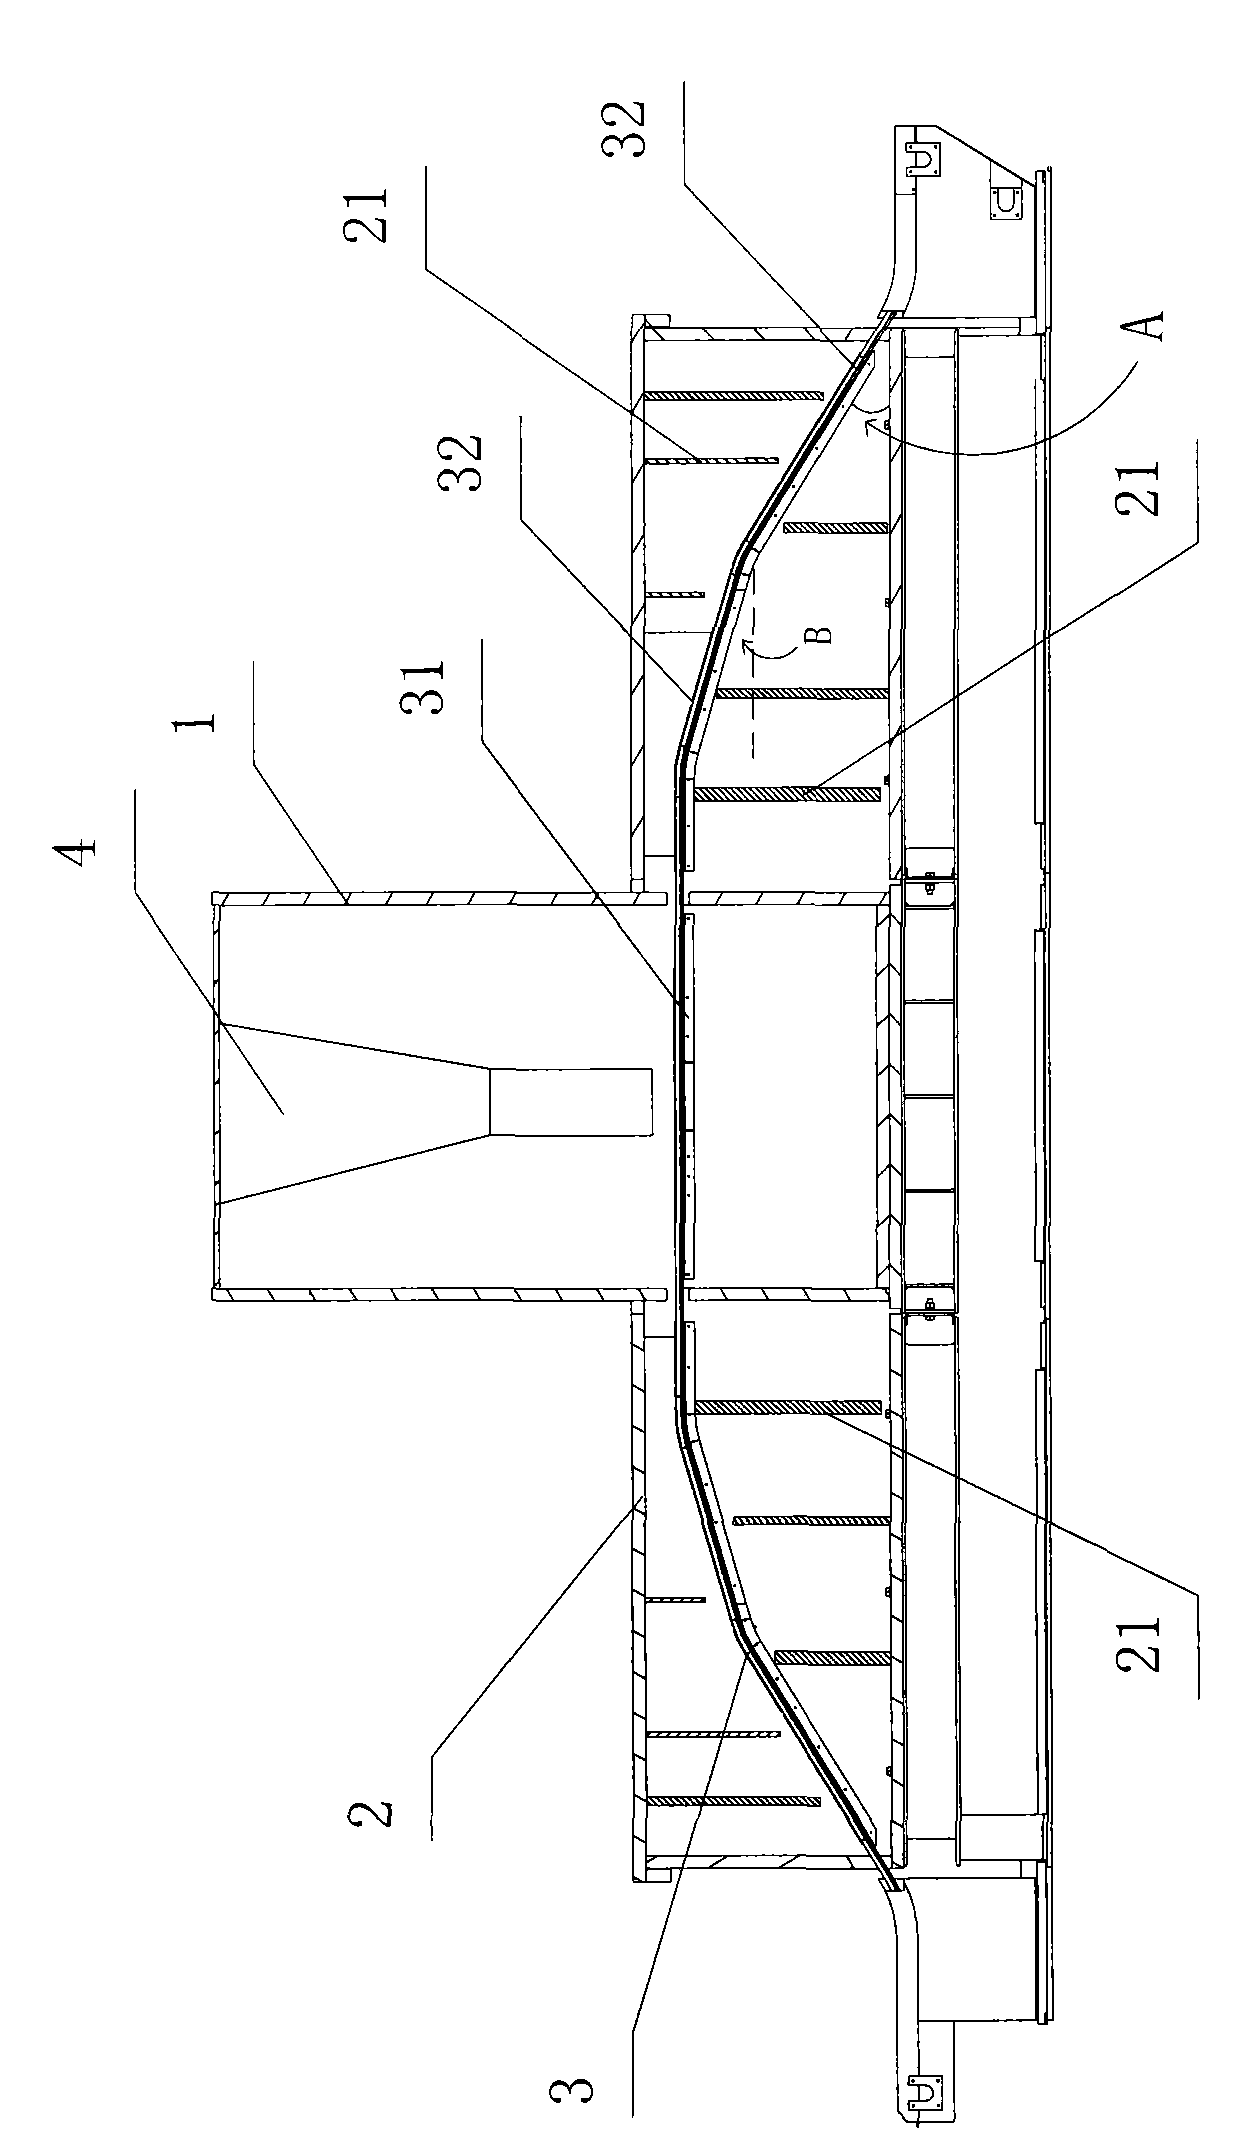 Tire rubber sheet electron radiation crosslinking pretreatment device and method